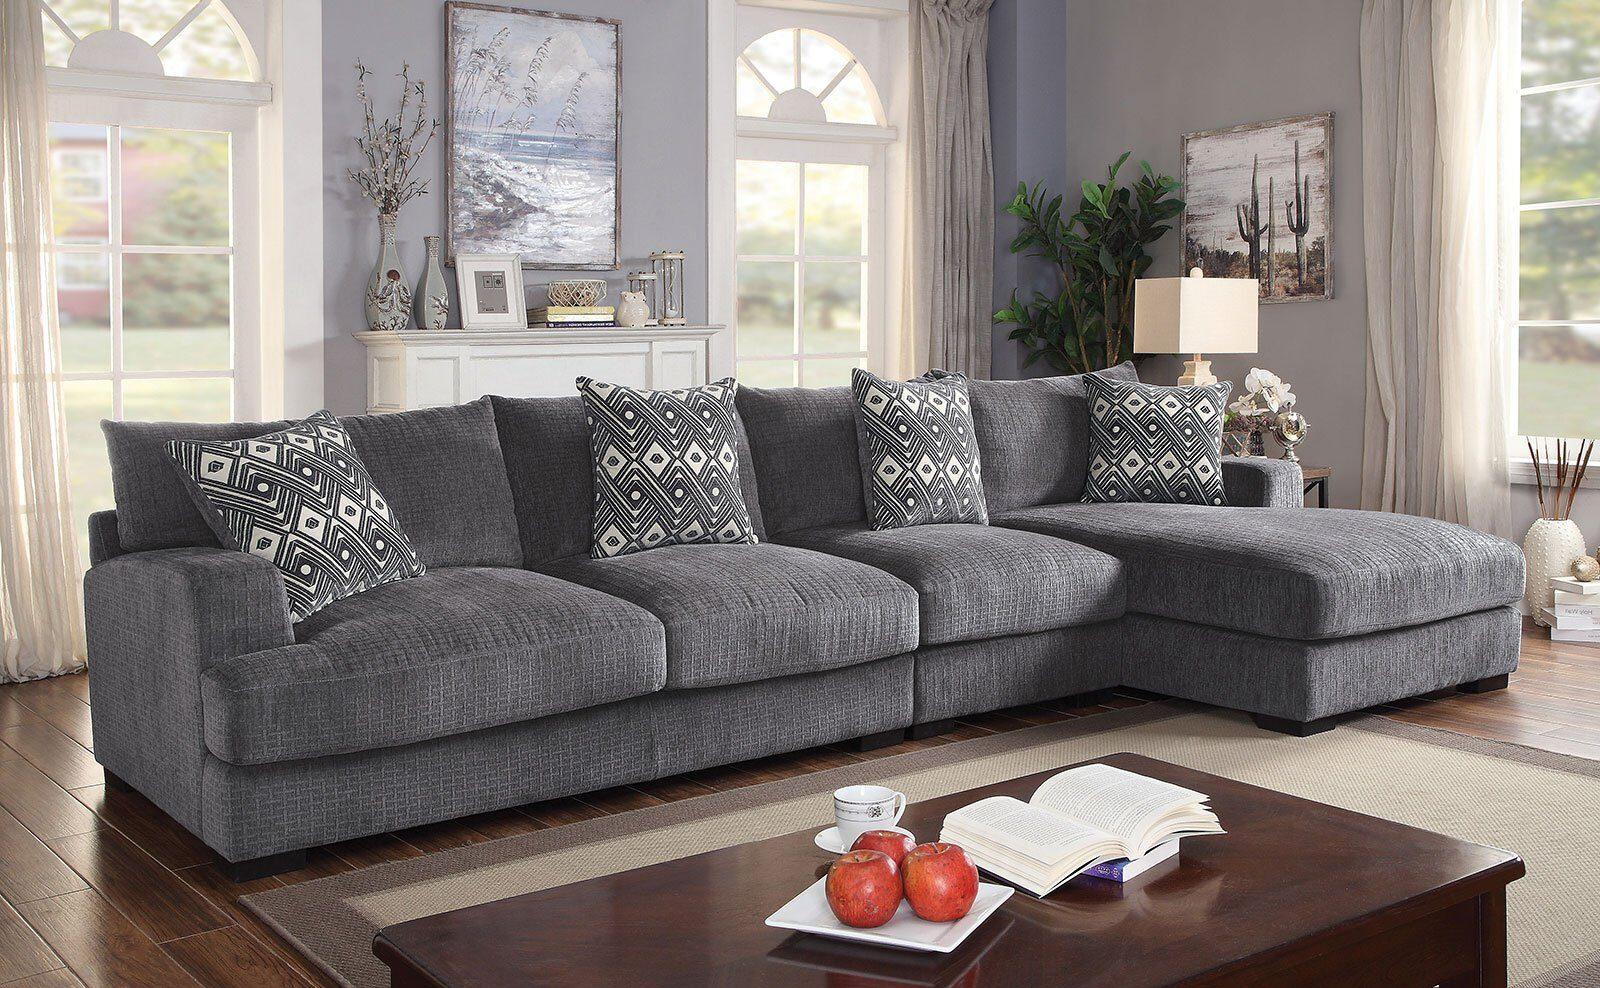 Contemporary Sectional Sofa CM6587-SECT-LL-R Kaylee CM6587-SECT-LL-R in Gray Chenille